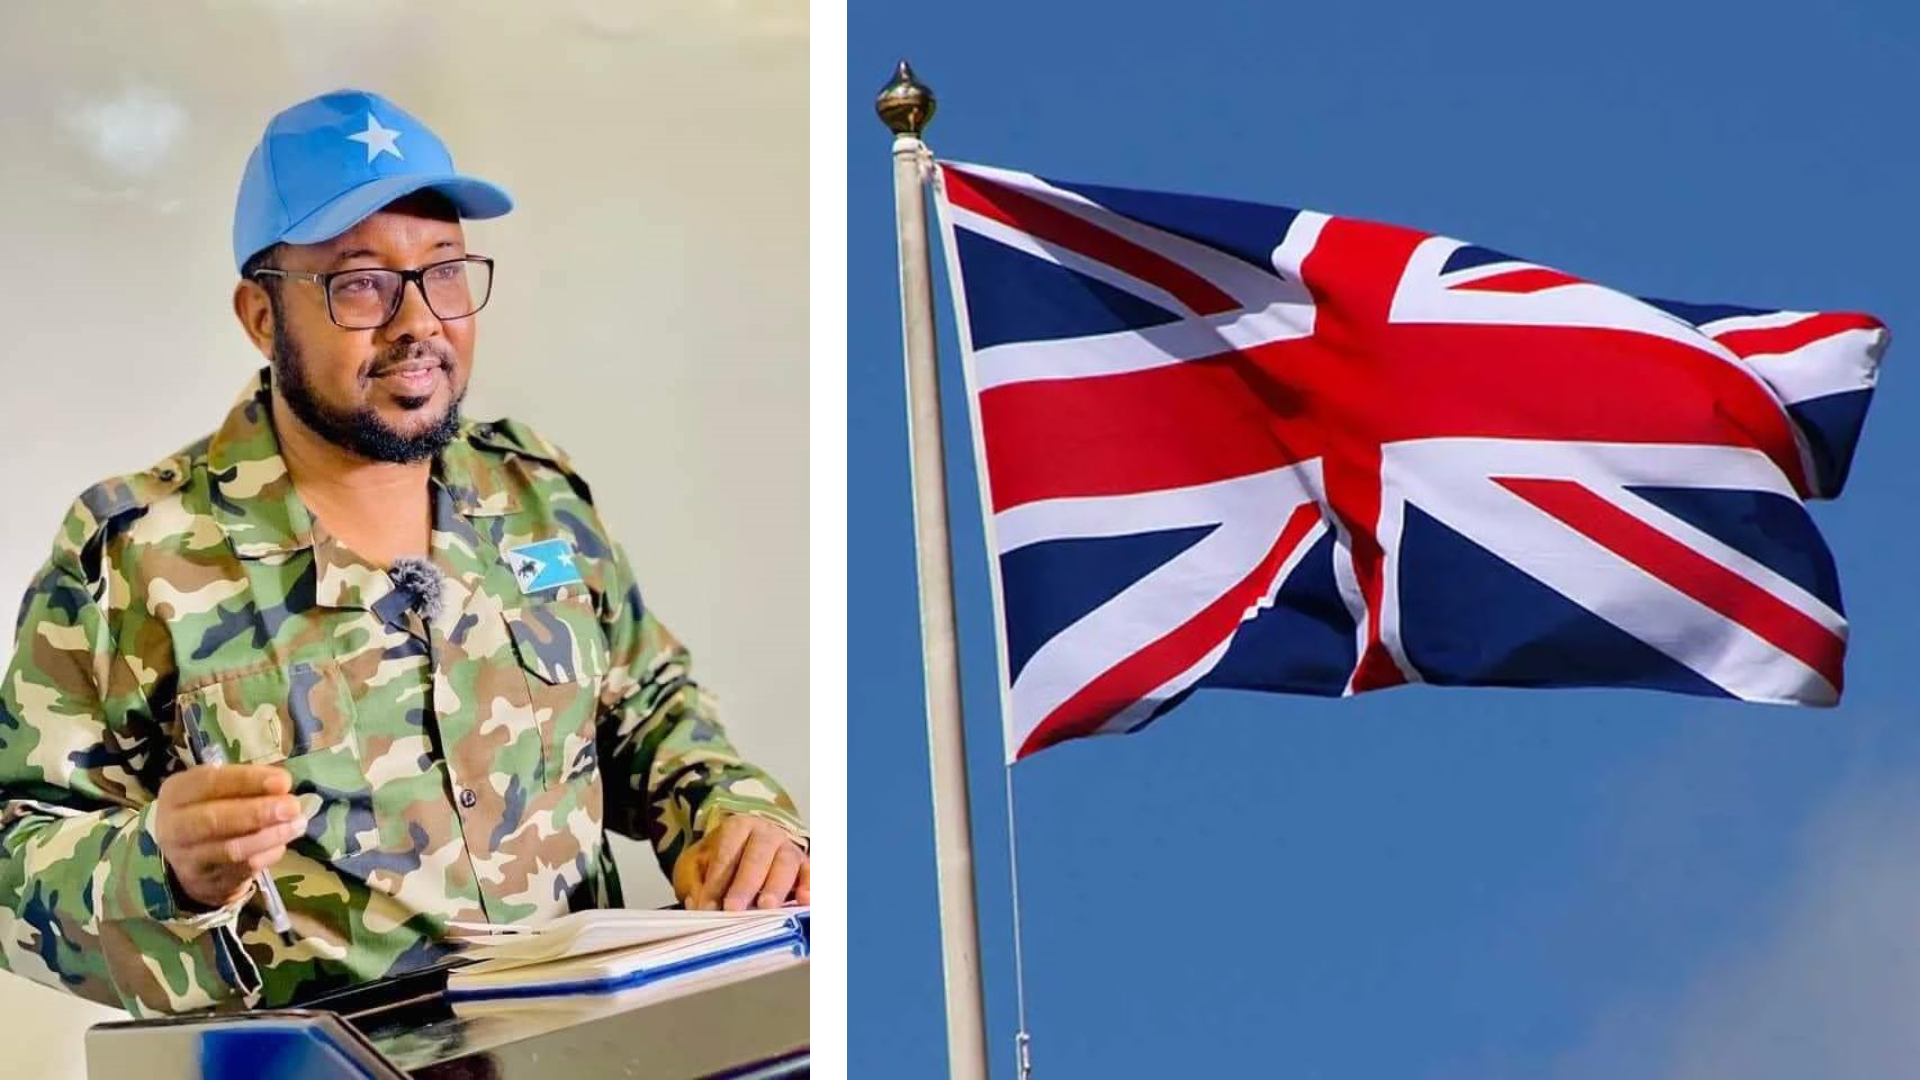 BRITISH COLINIAL RULE ONCE AGAIN DEFEATED IN SOMALIA